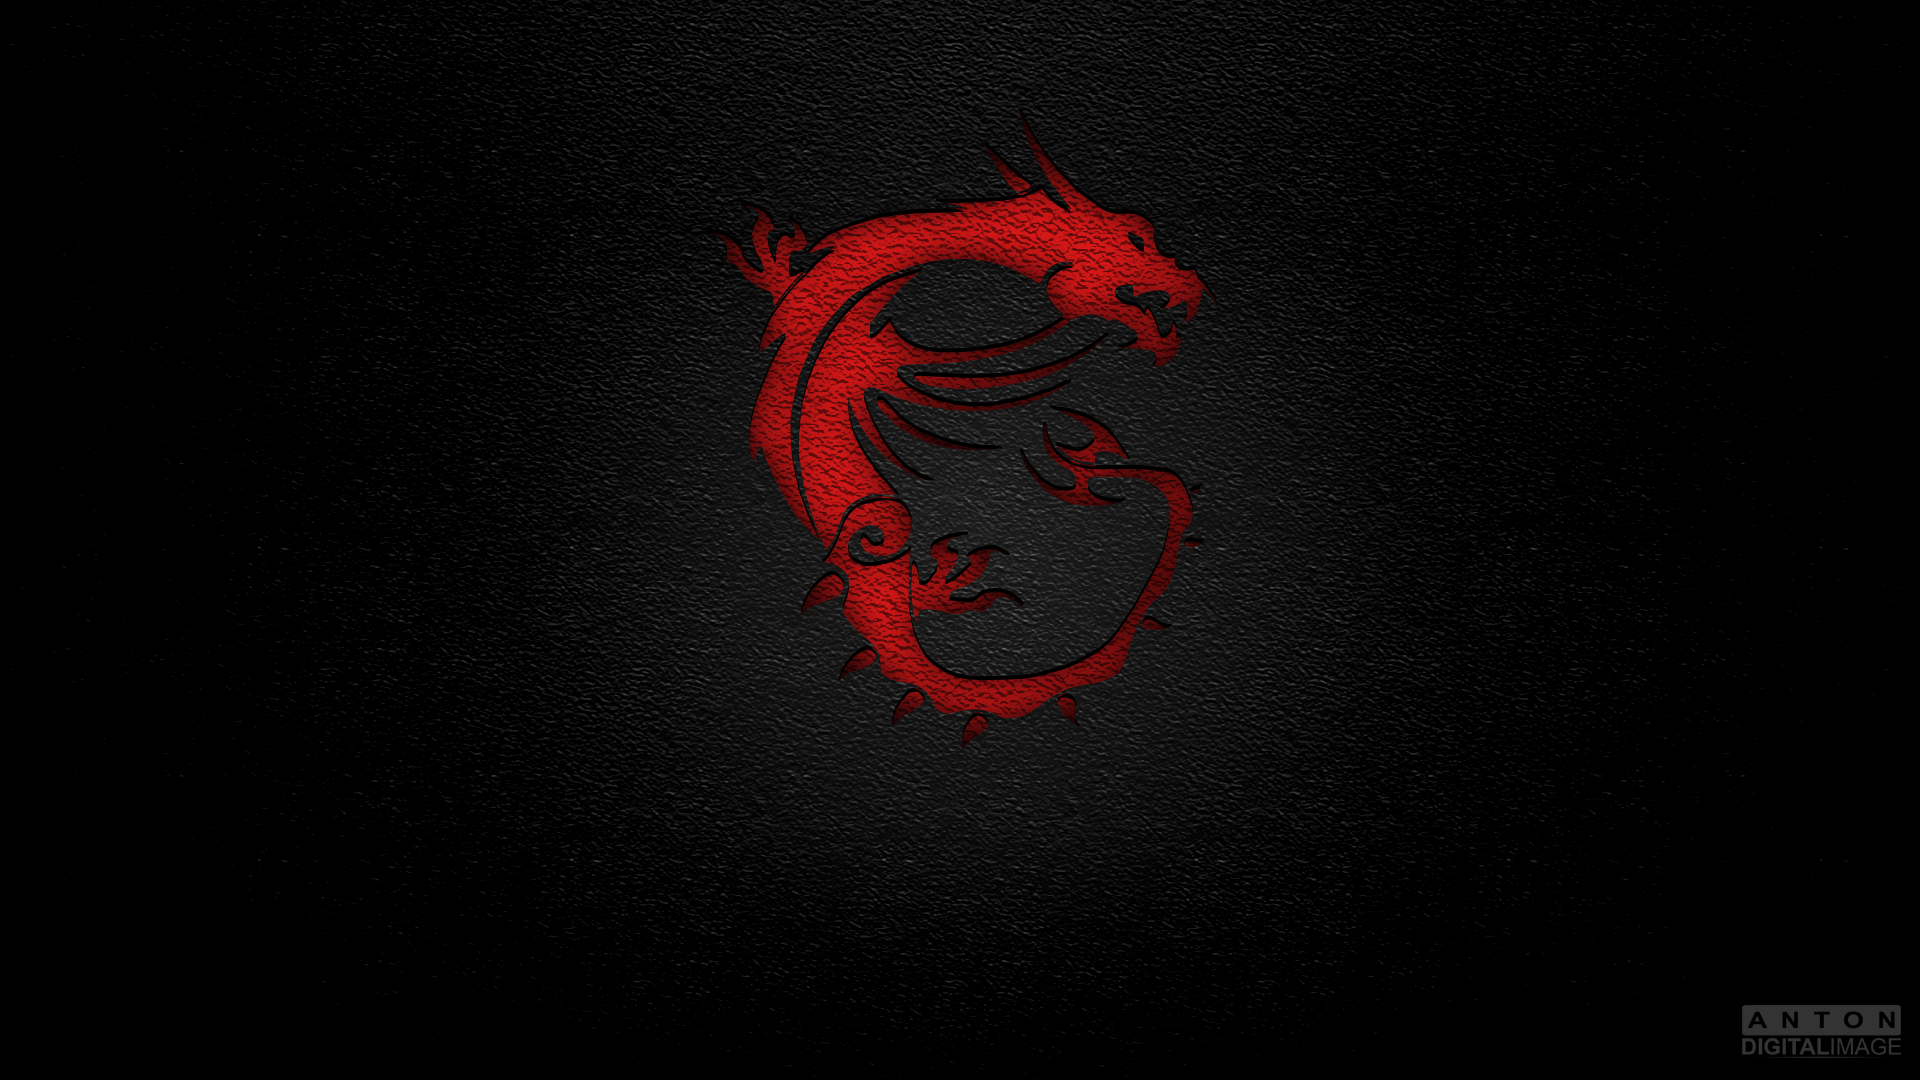 MSI Dragon Gaming Series Wallpaper 1080p by Thony32 on